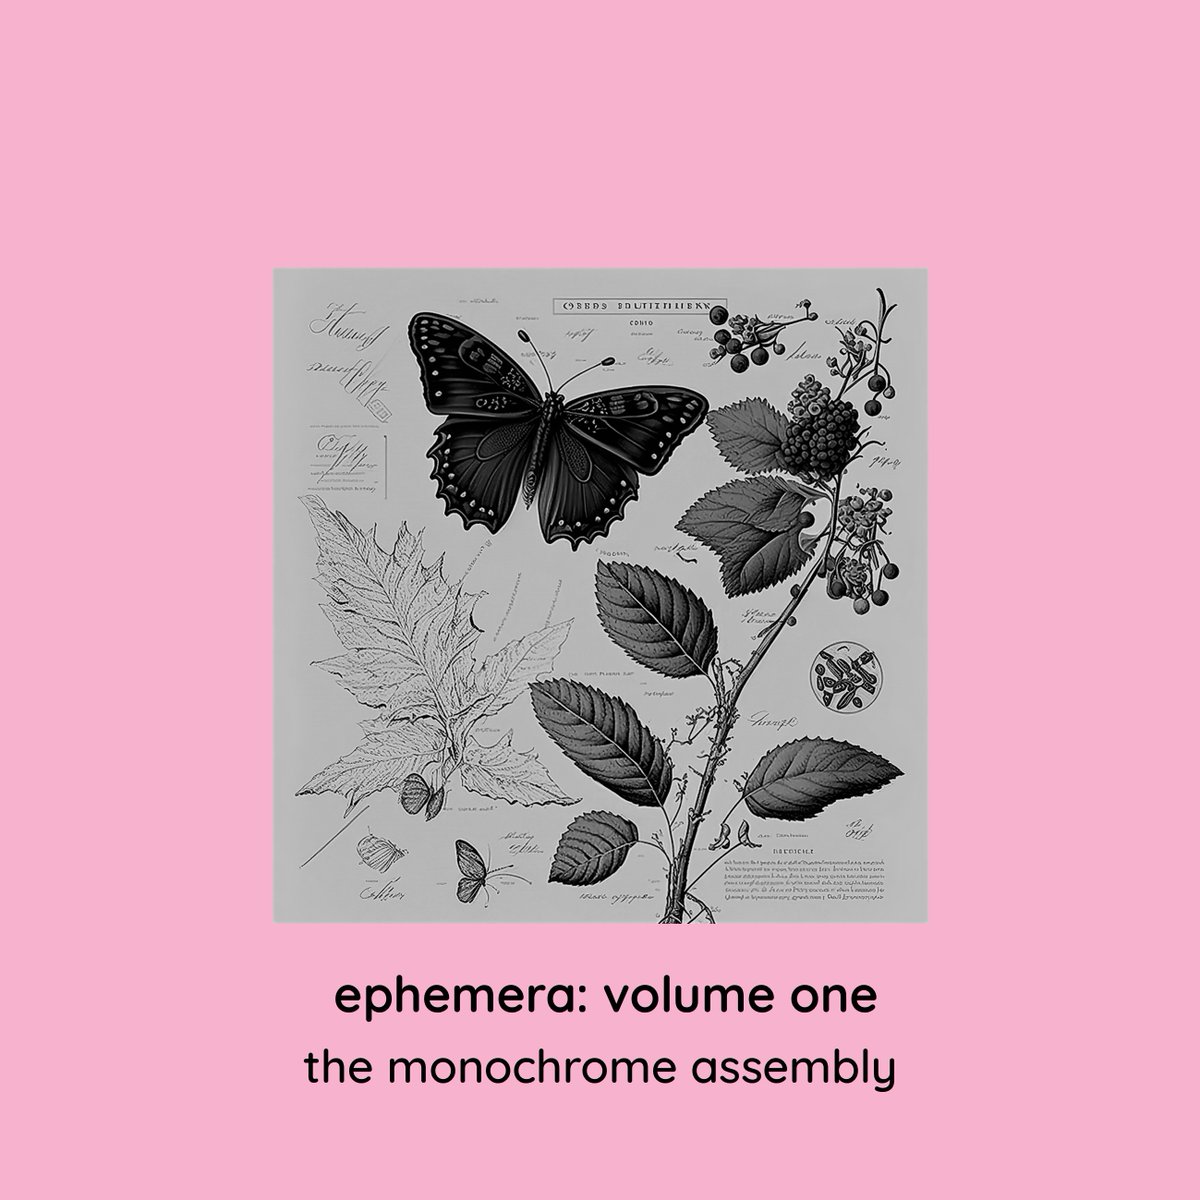 Let's tell you a bit more about Ephemera, our first Subscriber only album Track 9 is a wonderful instrumental version of the @cosmicbos 'Superspectacular' track, the original can be found on their mmc 1 (2023) album. 1/2 monochromemotif.bandcamp.com/subscribe